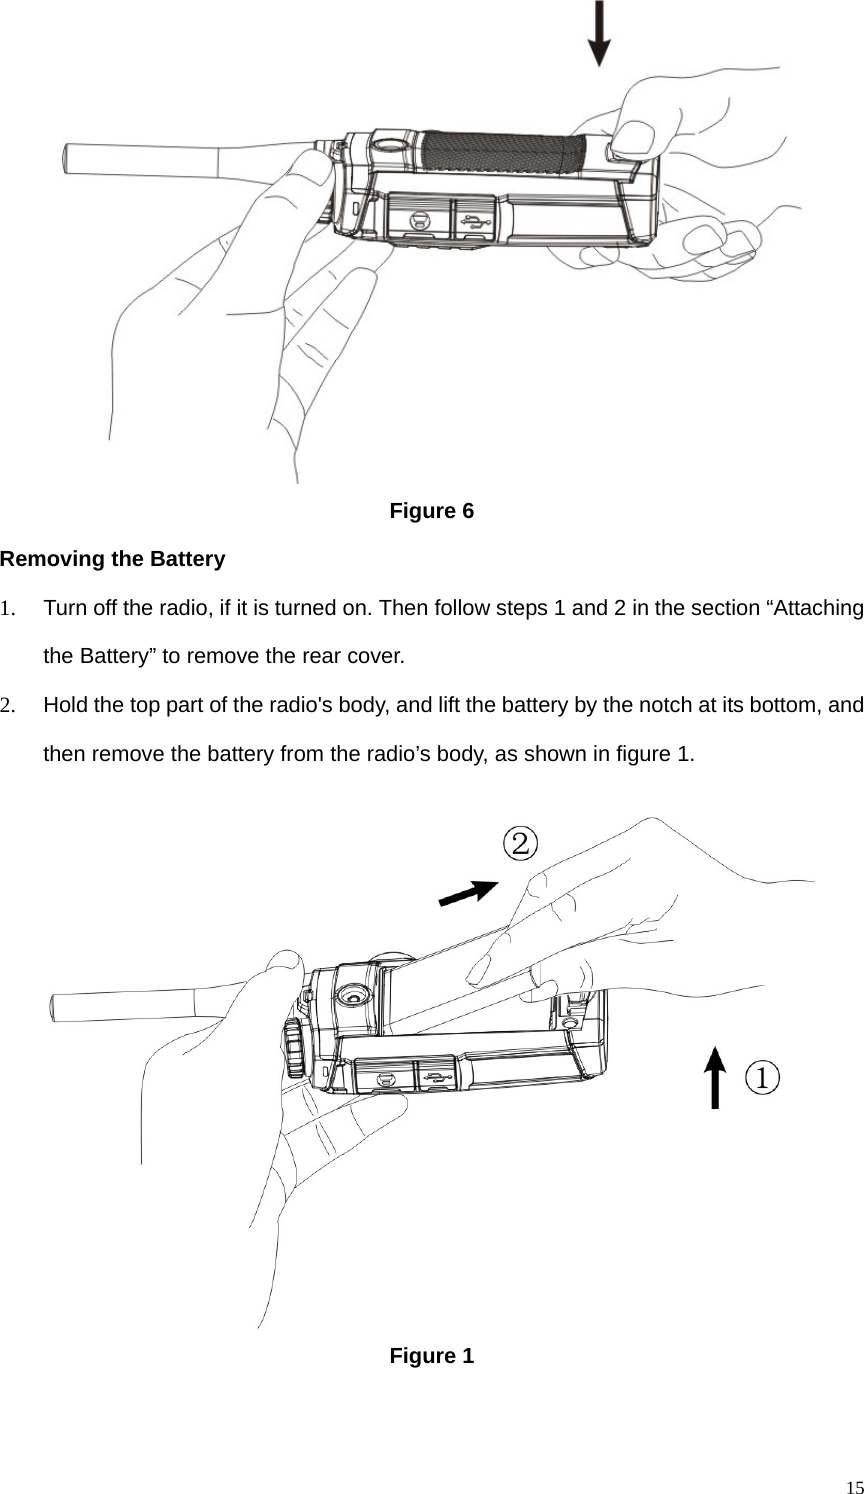   15 Figure 6 Removing the Battery 1.  Turn off the radio, if it is turned on. Then follow steps 1 and 2 in the section “Attaching the Battery” to remove the rear cover. 2.  Hold the top part of the radio&apos;s body, and lift the battery by the notch at its bottom, and then remove the battery from the radio’s body, as shown in figure 1.    Figure 1 